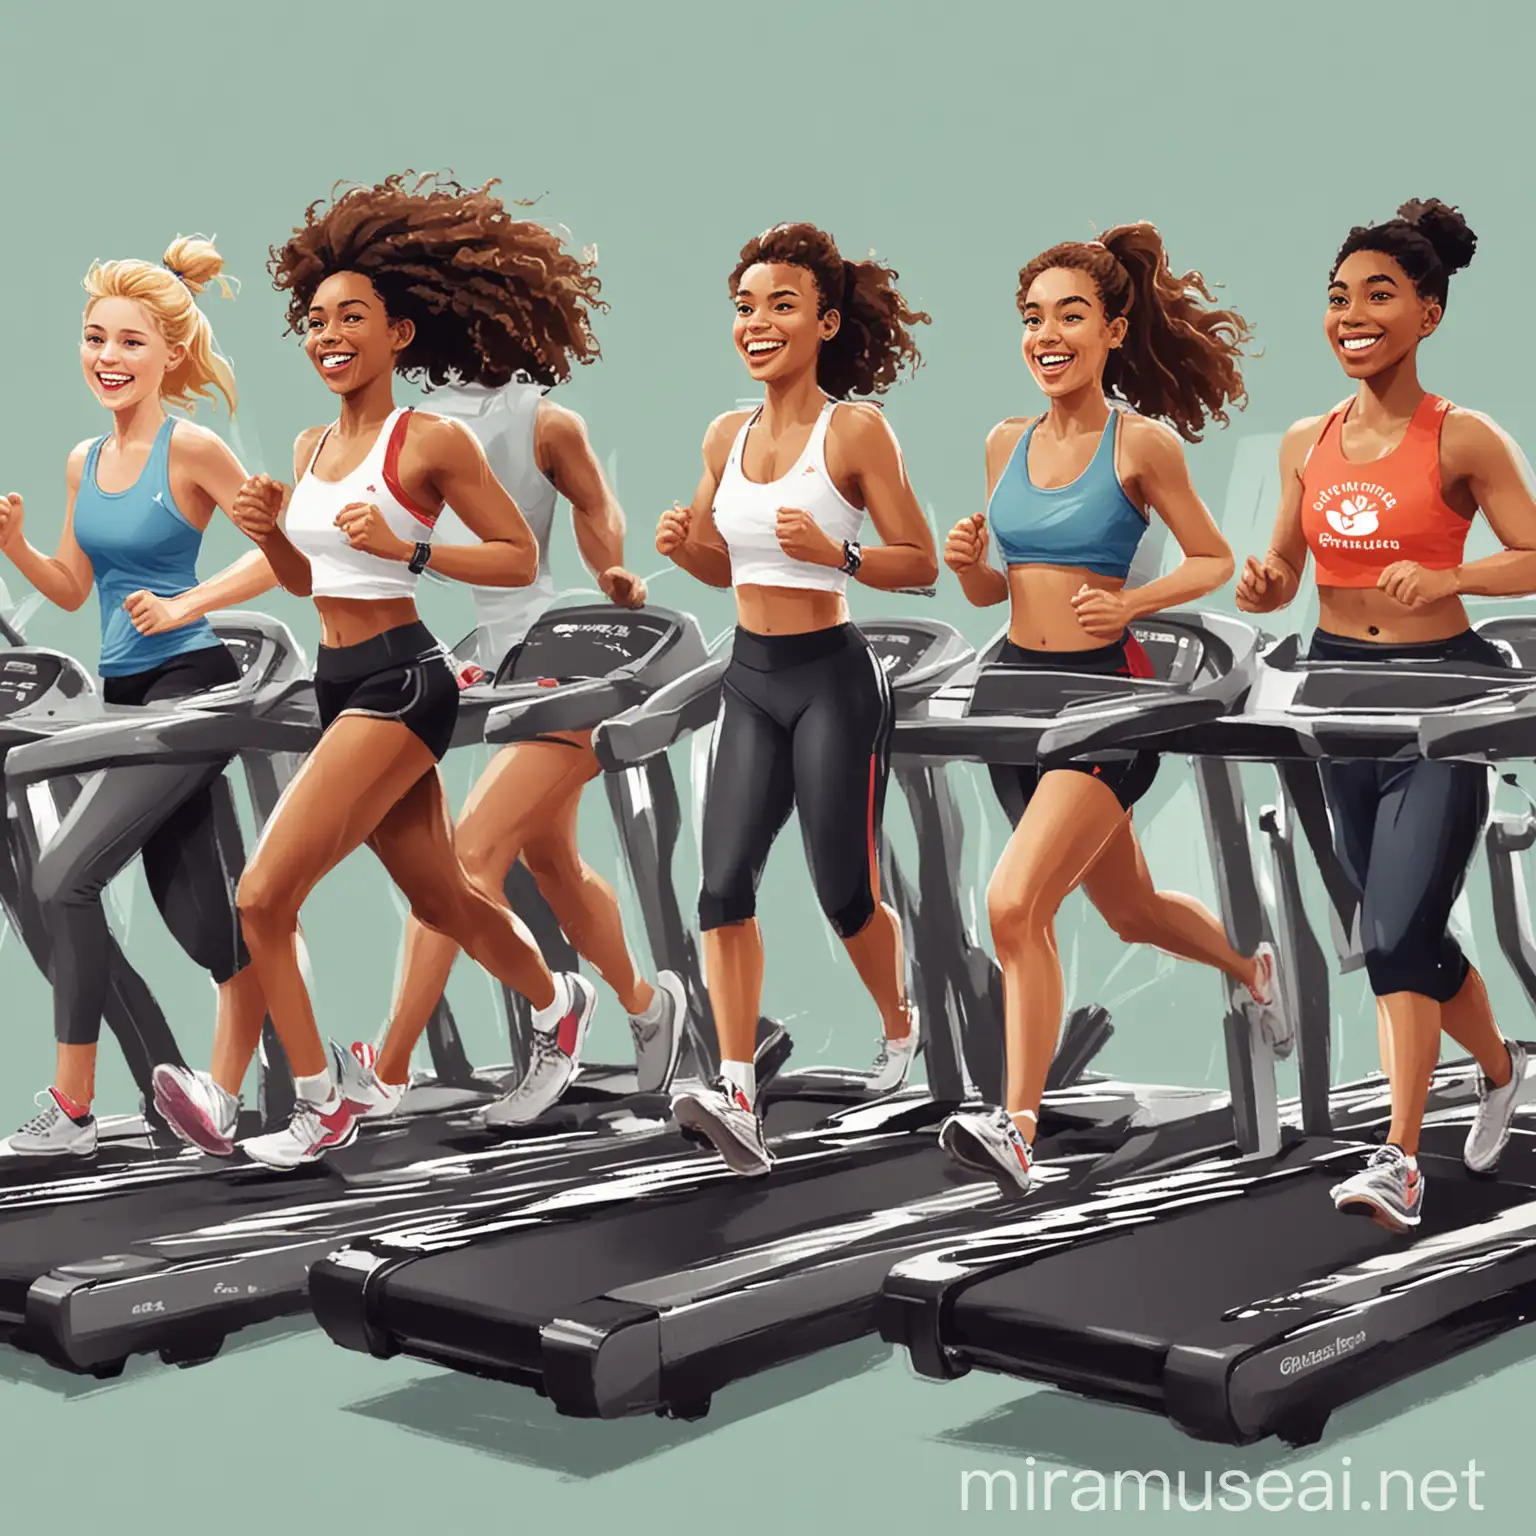 Design an illustration of a diverse group of people smiling and jogging together on treadmills, with a prominent logo of the treadmill brand in the background.